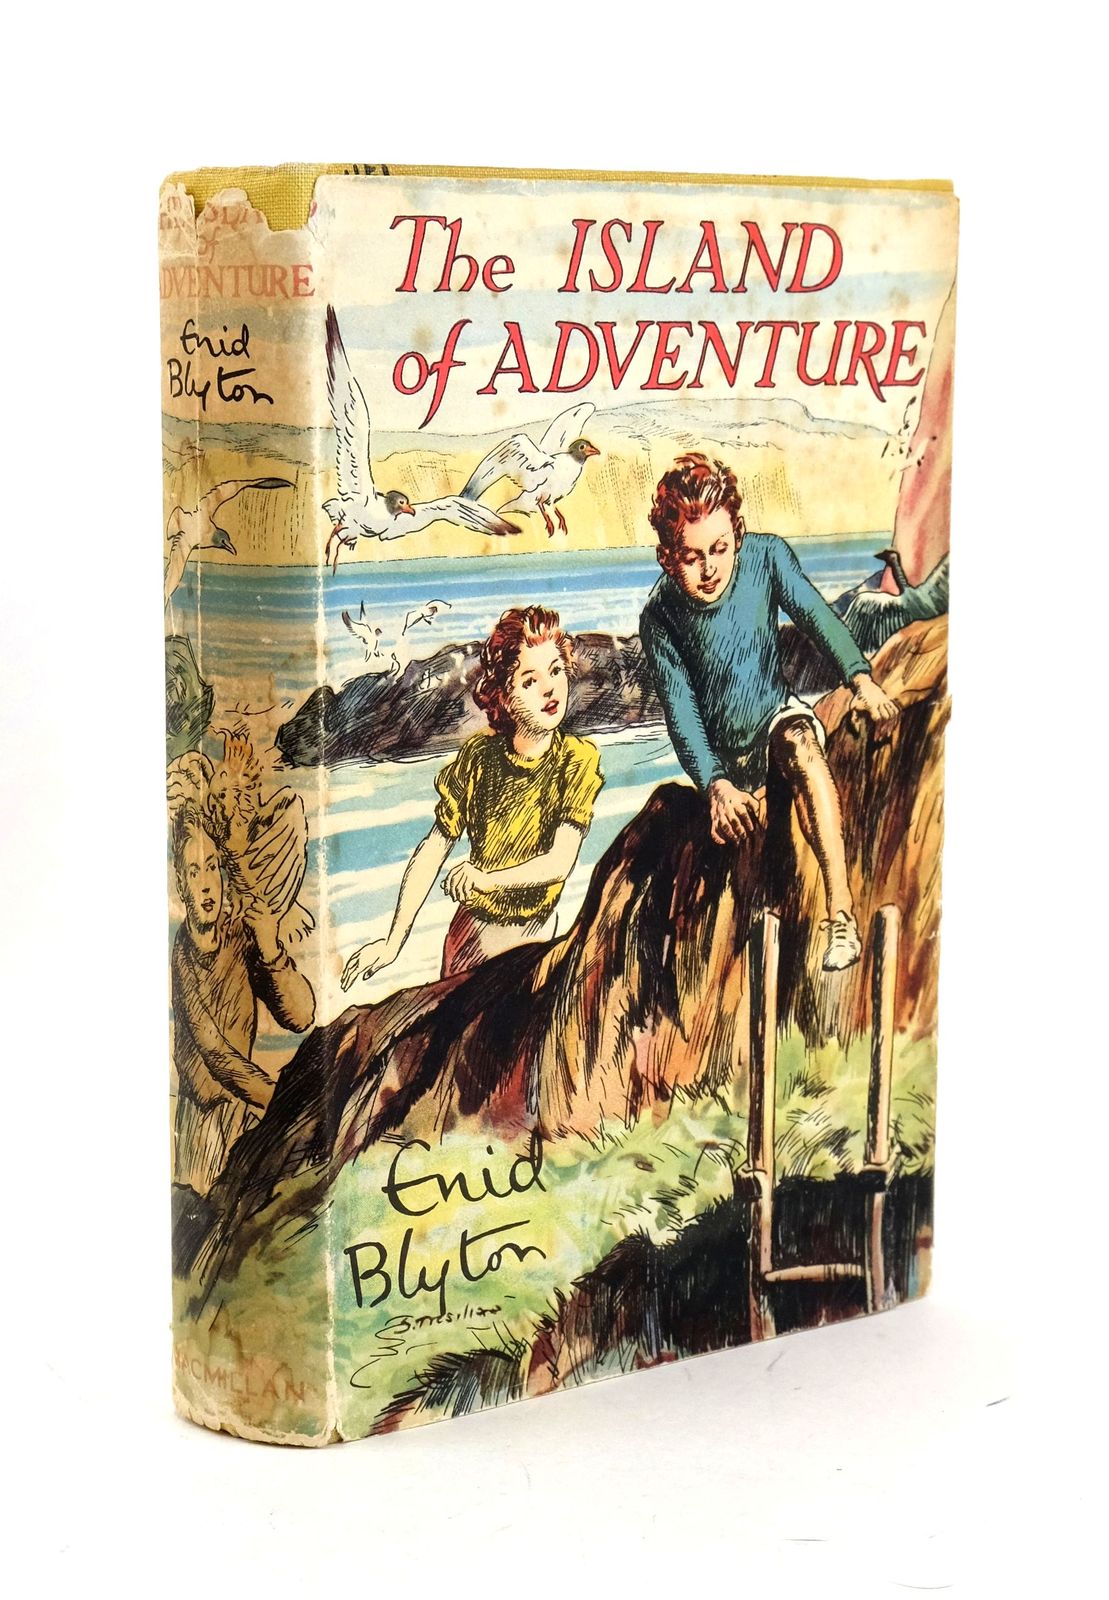 Photo of THE ISLAND OF ADVENTURE written by Blyton, Enid illustrated by Tresilian, Stuart published by Macmillan &amp; Co. Ltd. (STOCK CODE: 1326665)  for sale by Stella & Rose's Books